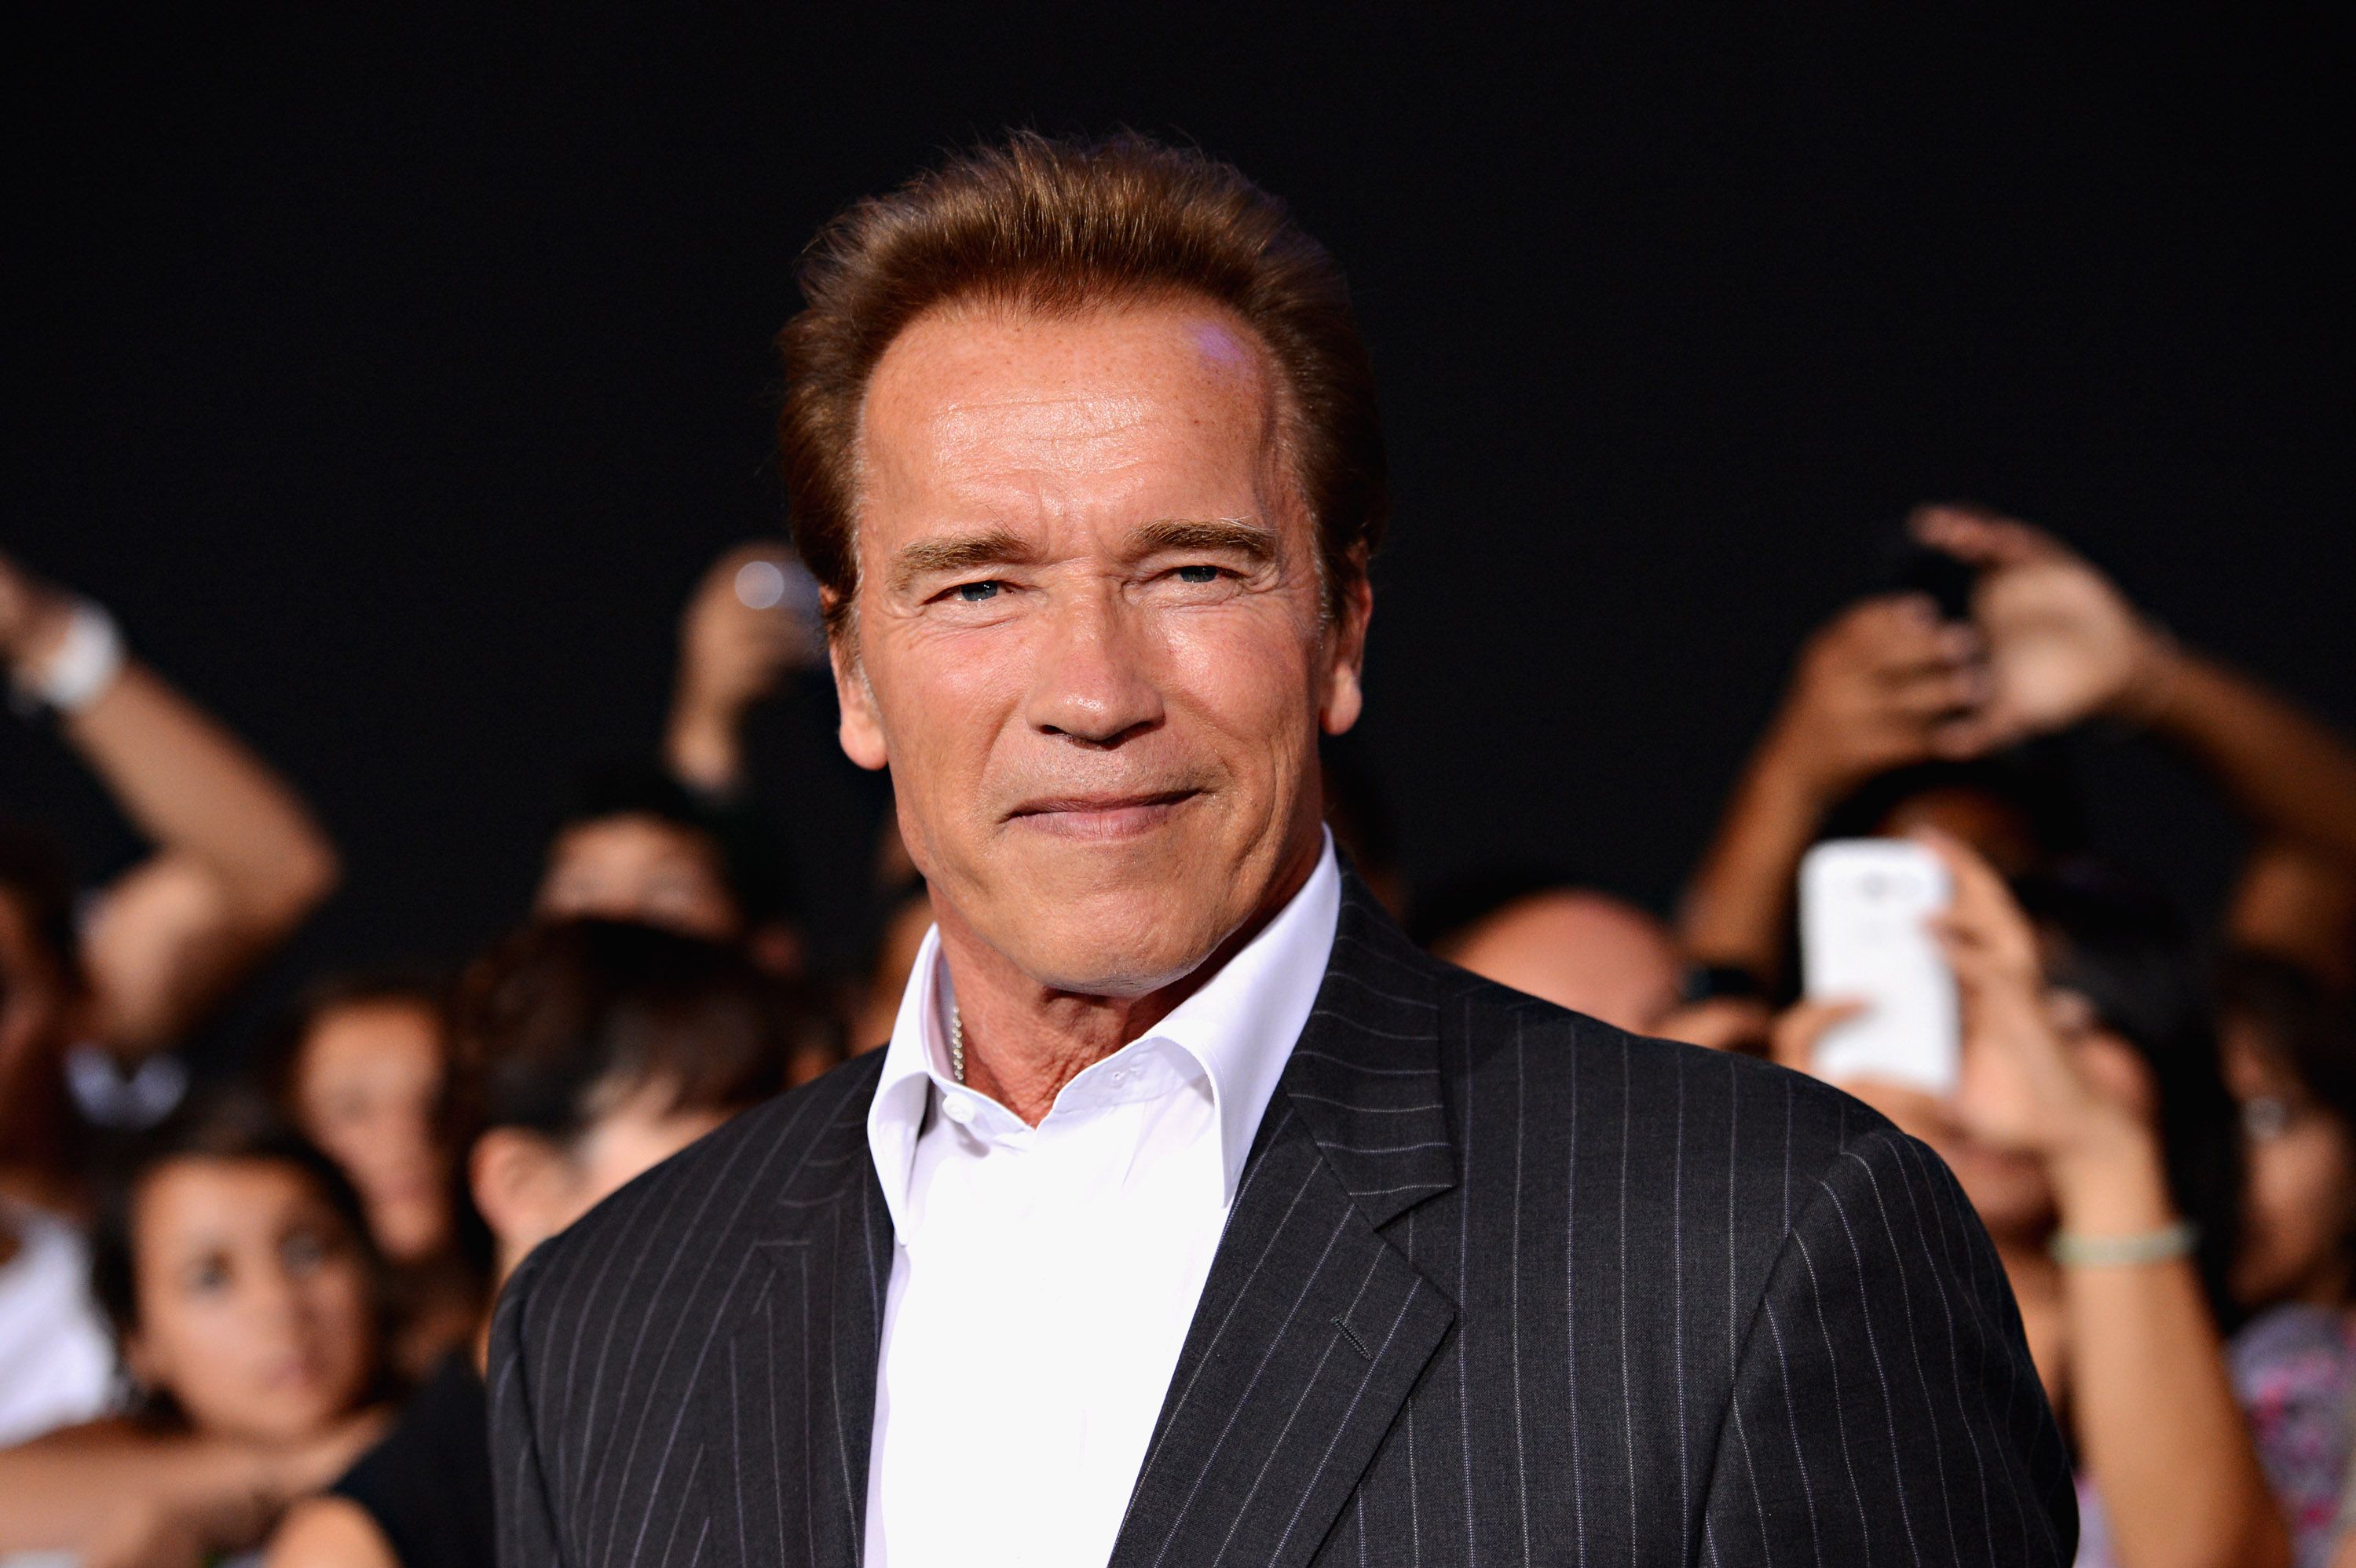 Arnold Schwarzenegger arrives at Lionsgate Films' "The Expendables 2" premiere on August 15, 2012, in Hollywood, California | Photo: Jason Merritt/Getty Images